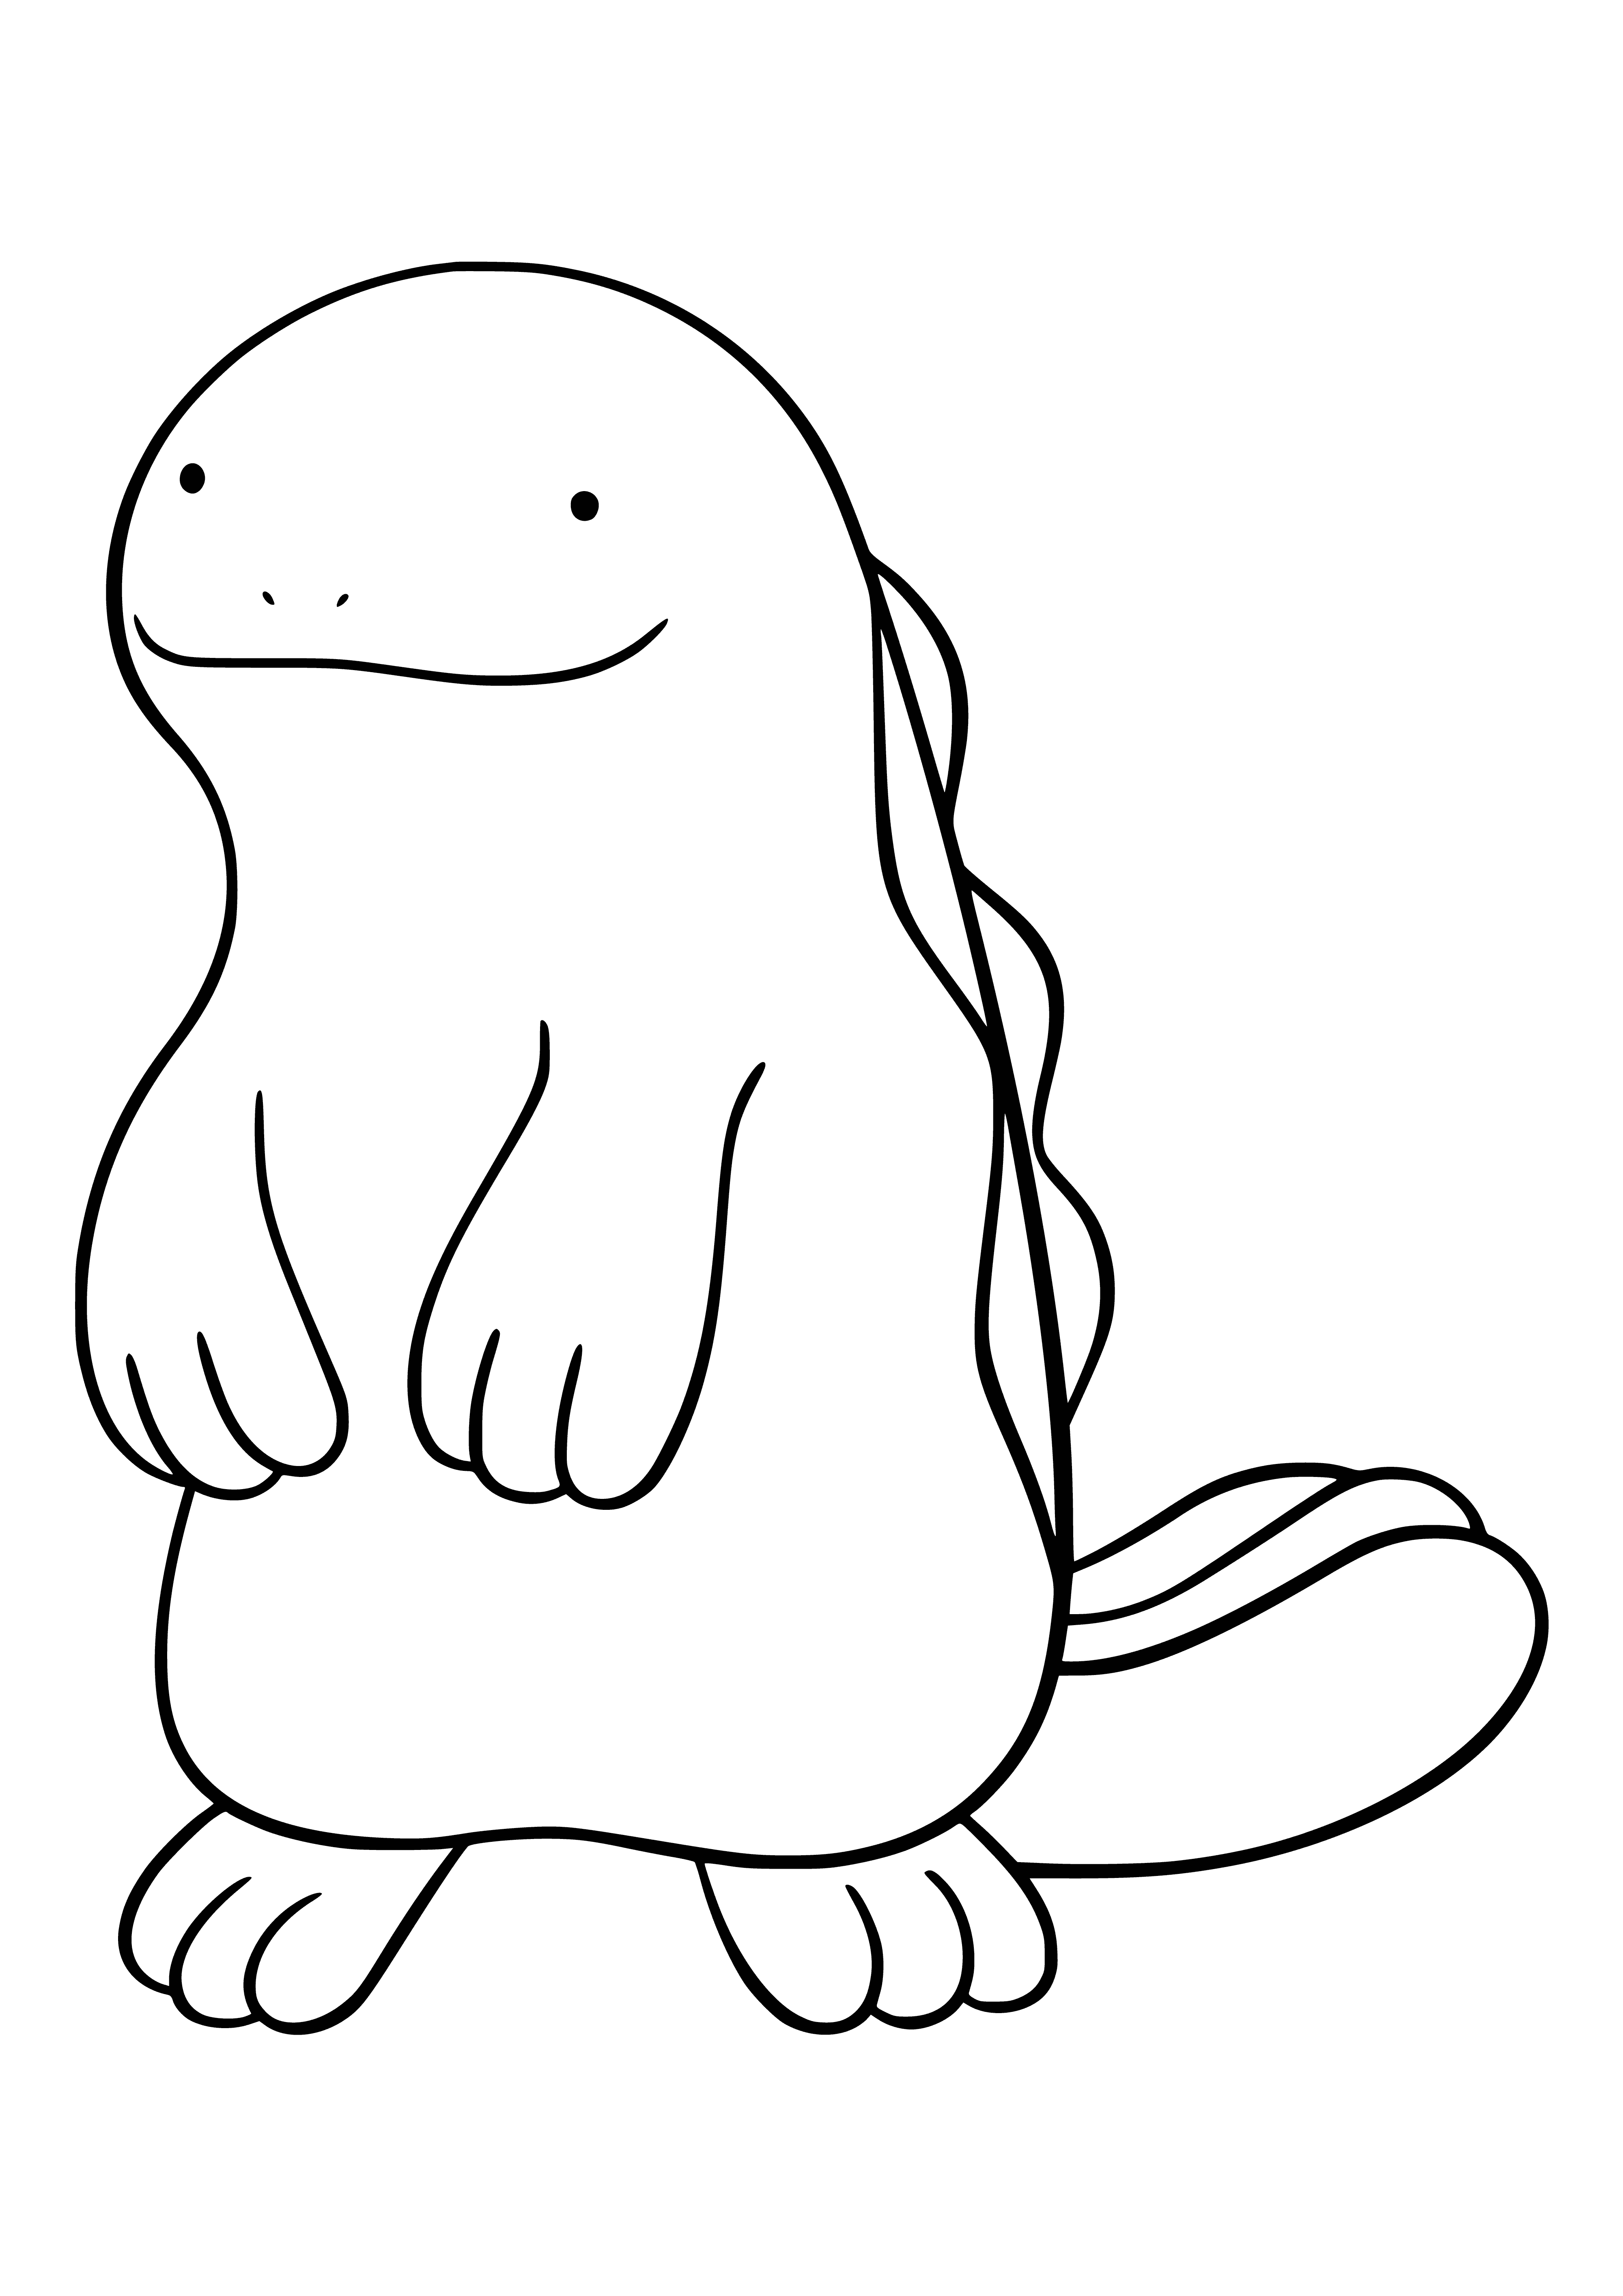 coloring page: A blue Hippopotas-like Pokemon that evolves from Wooper. Passive with beak-like mouth, large hands and feet, and long tail. Water-type, evolves at level 20.